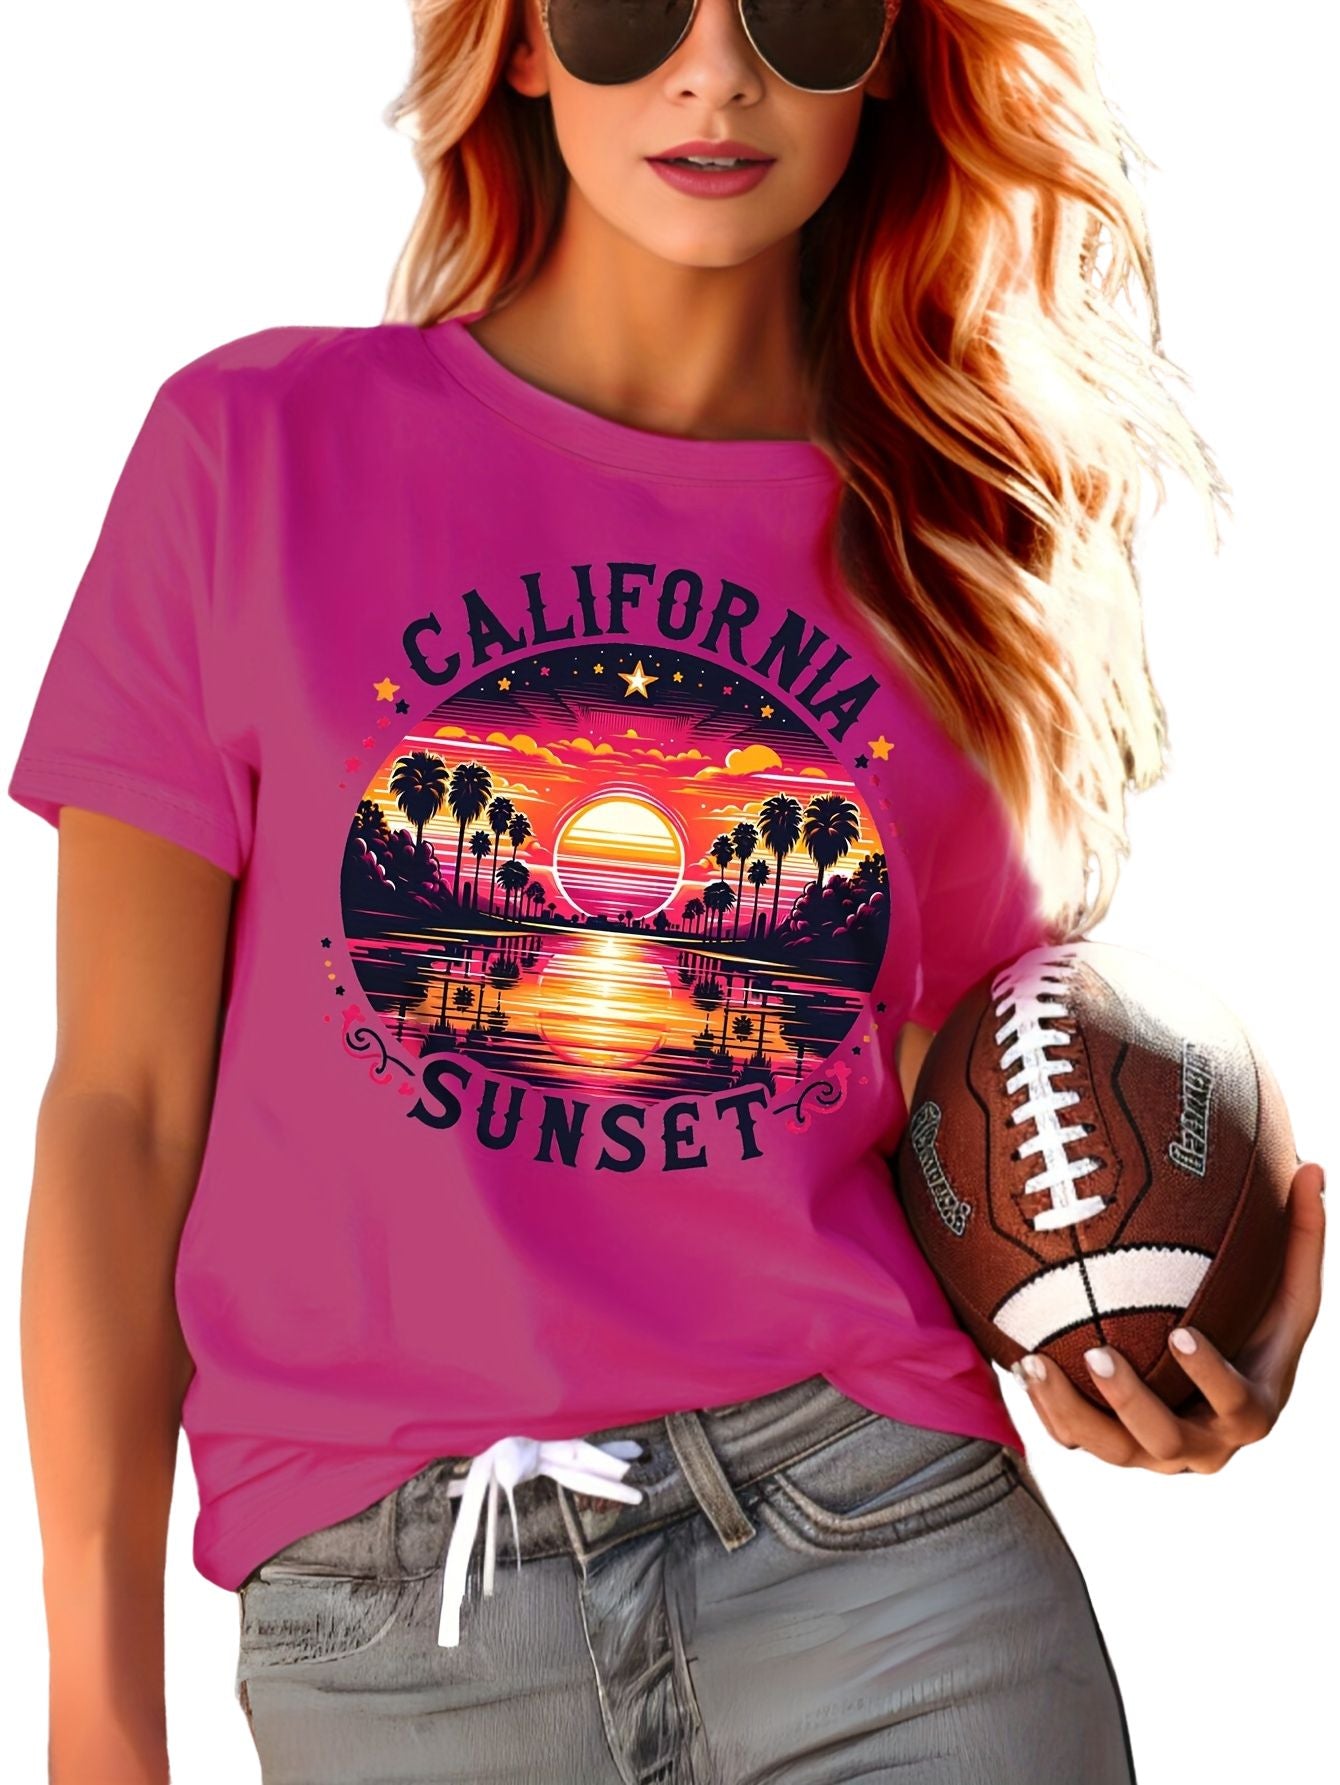 California Sunset Print T-shirt, Casual Crew Neck Short Sleeve Top For Spring & Summer, Women's Clothing